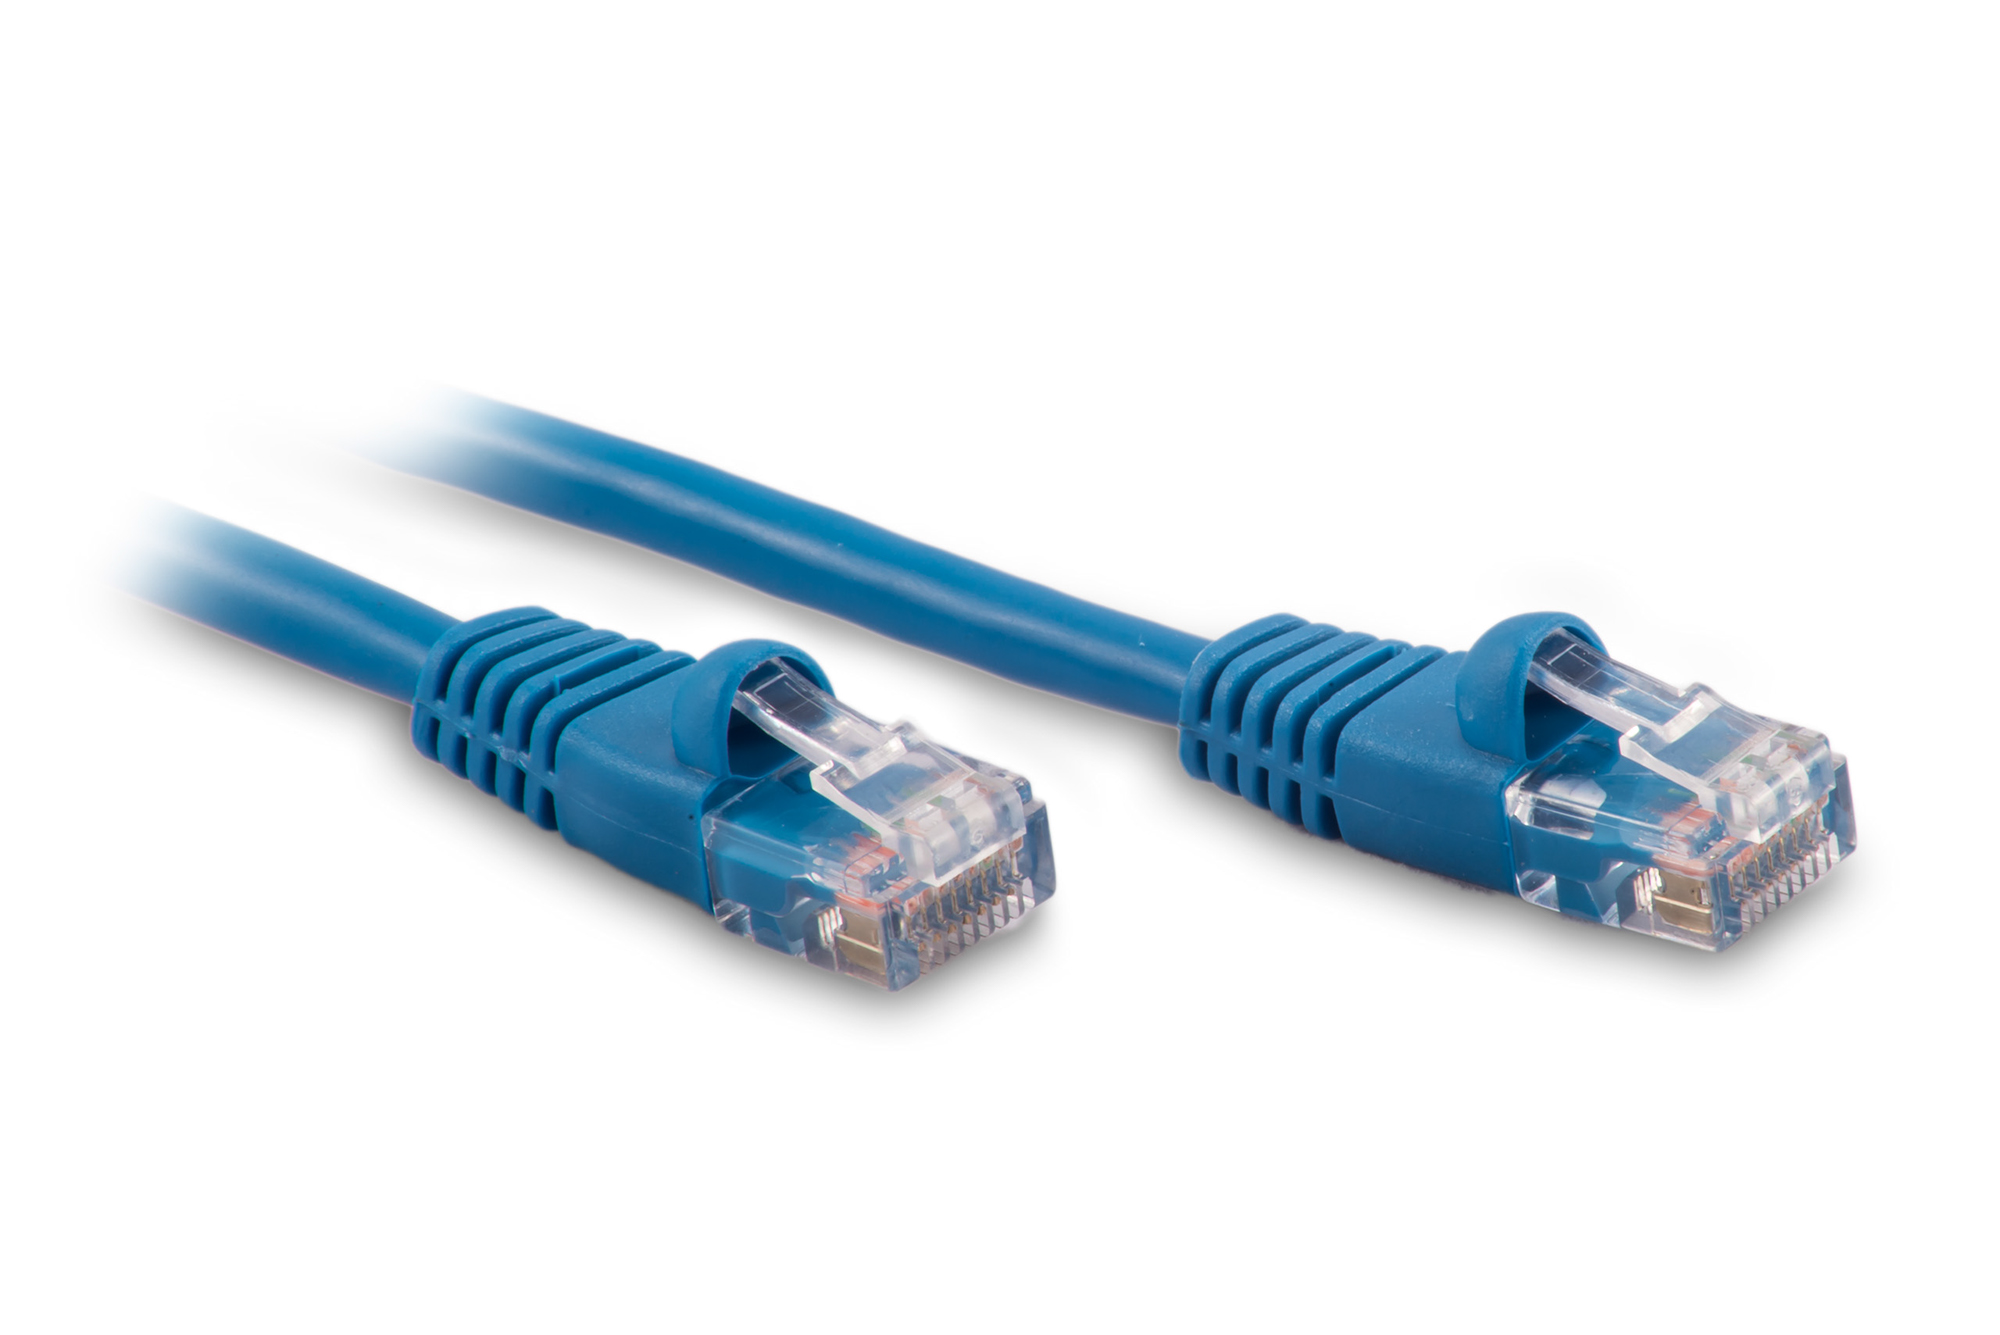 4ft Cat6 Ethernet Patch Cable - Blue Color - Snagless Boot